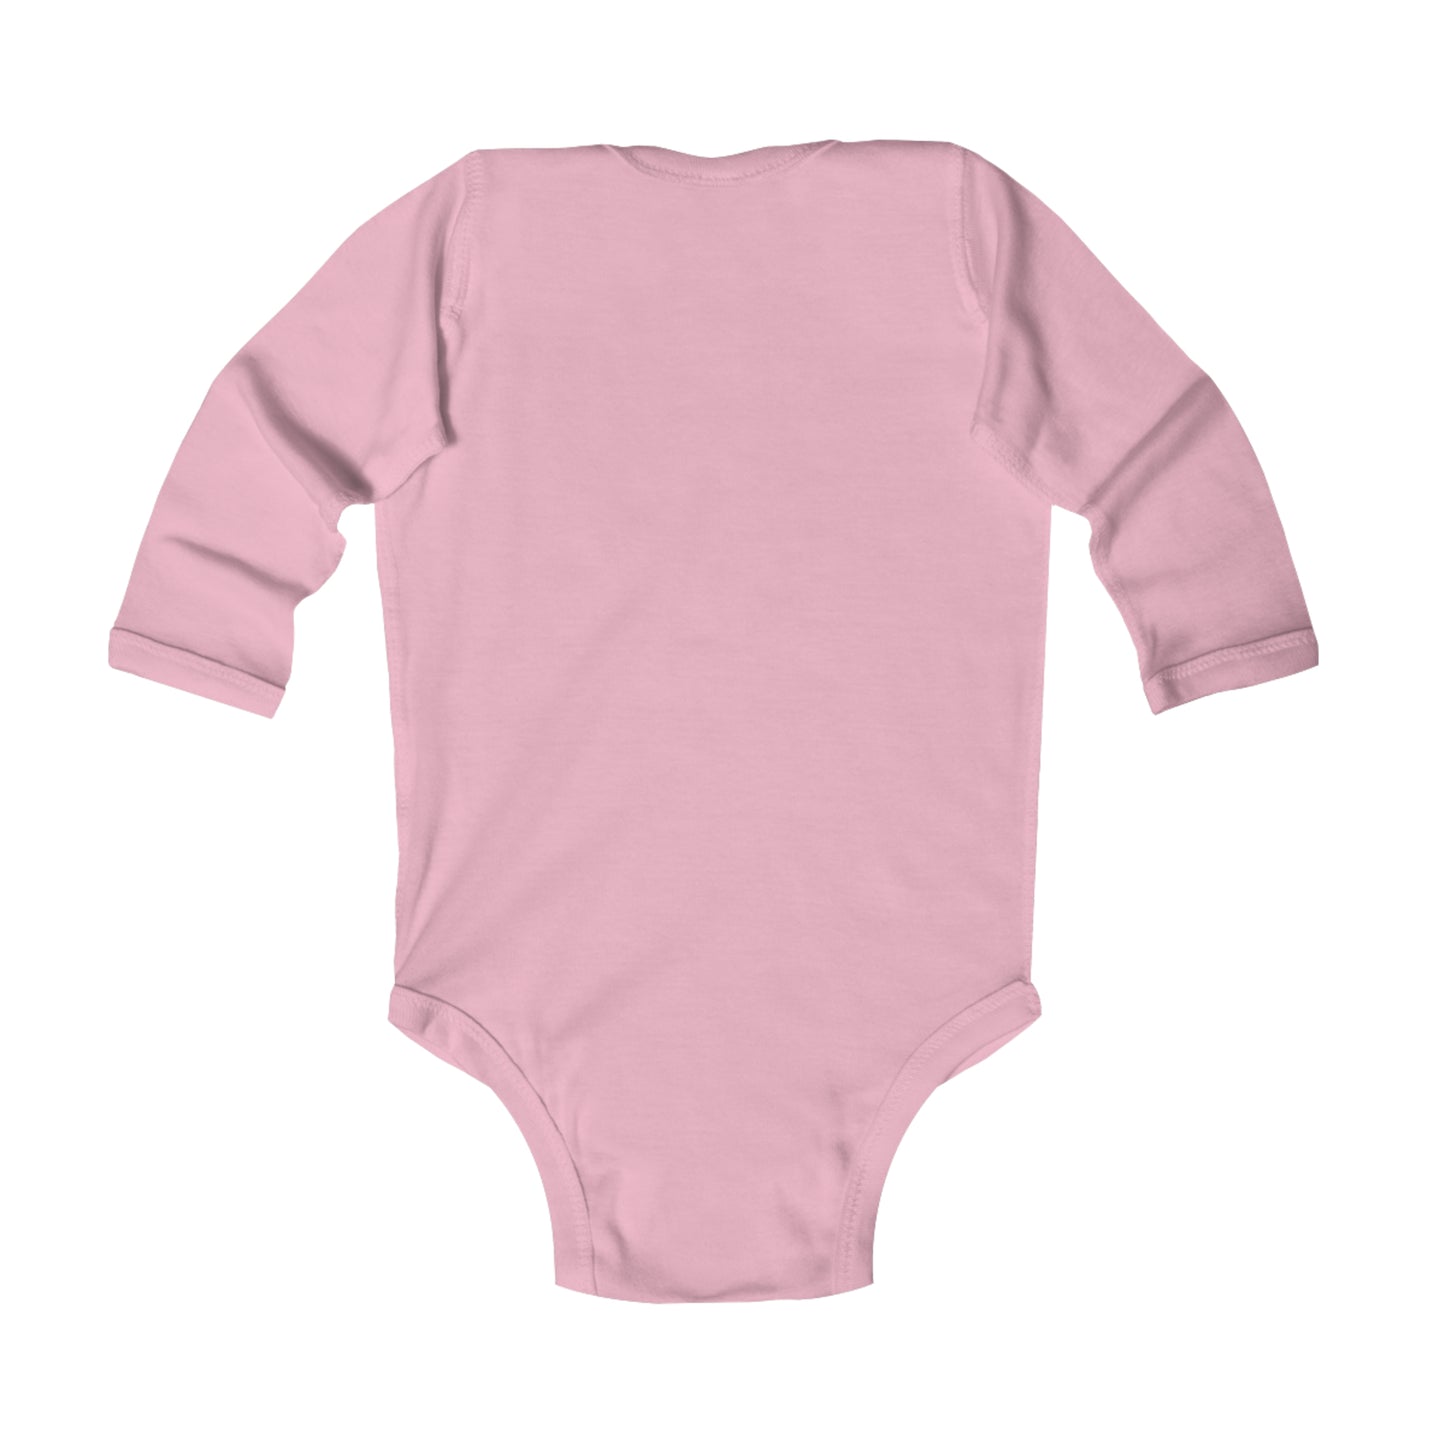 An Christmas Tree Infant Long Sleeve Bodysuit in pink, perfect for baby's first Printify celebration.